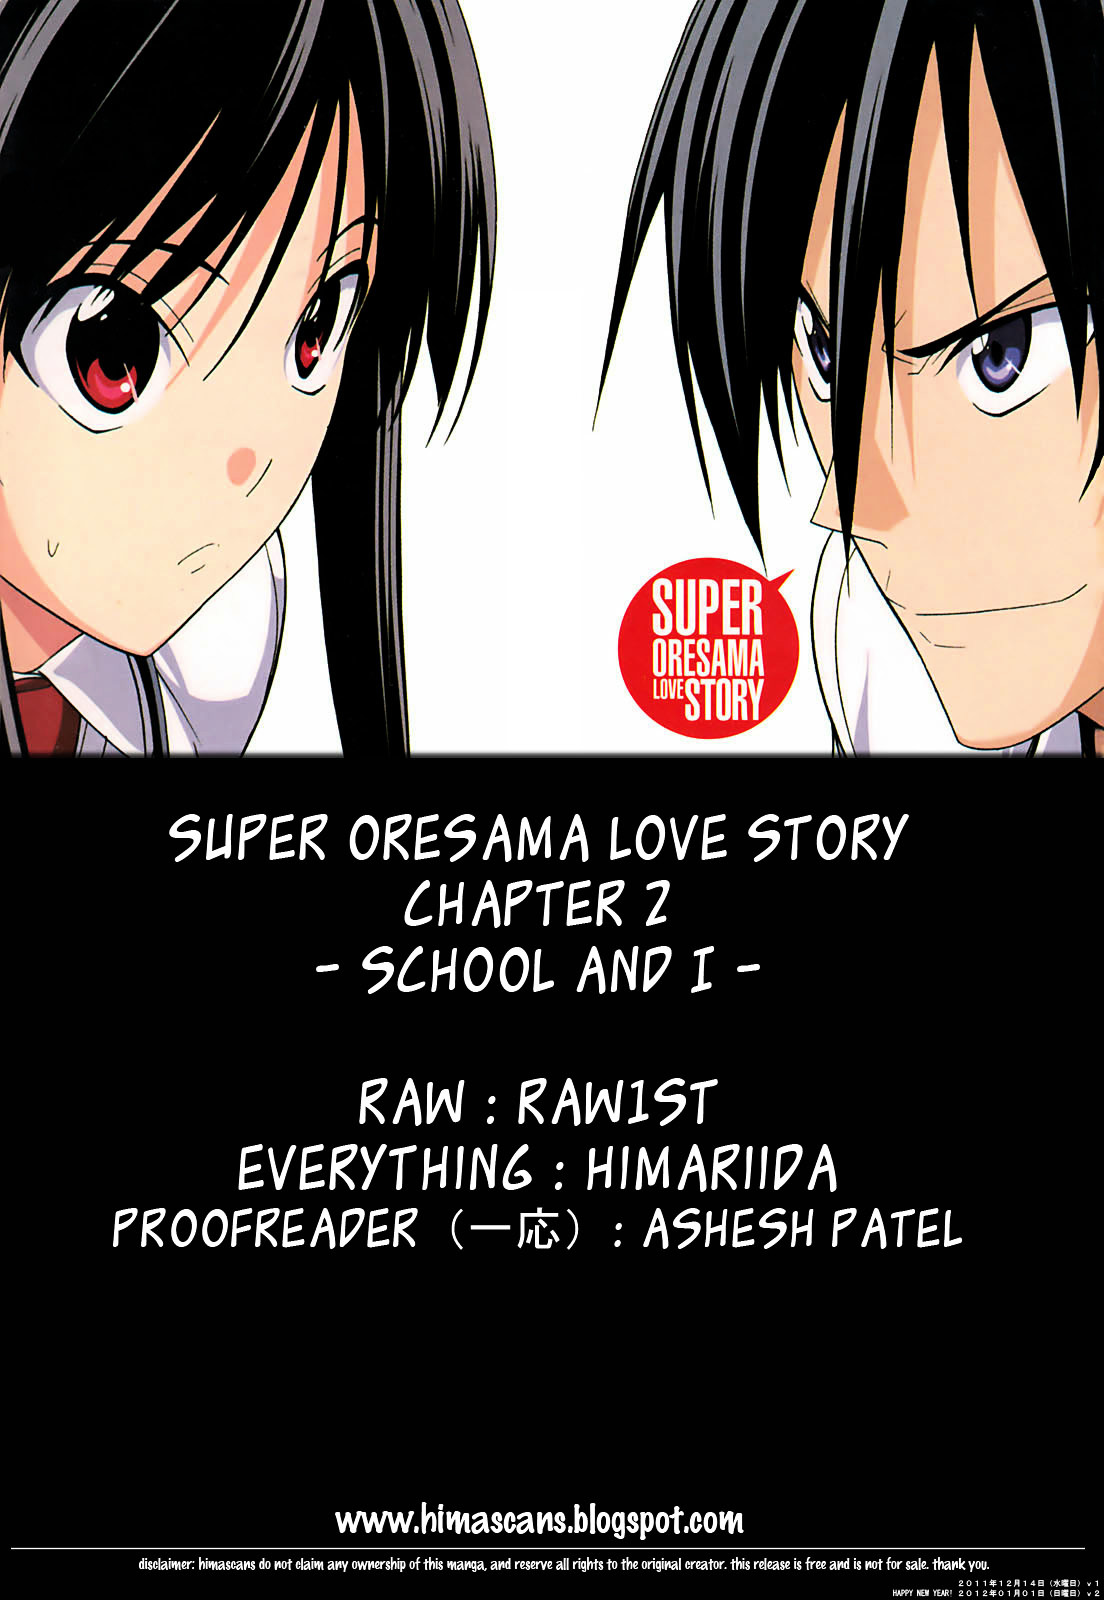 Super Oresama Love Story Vol.1 Chapter 2V2 : School And I - Picture 1